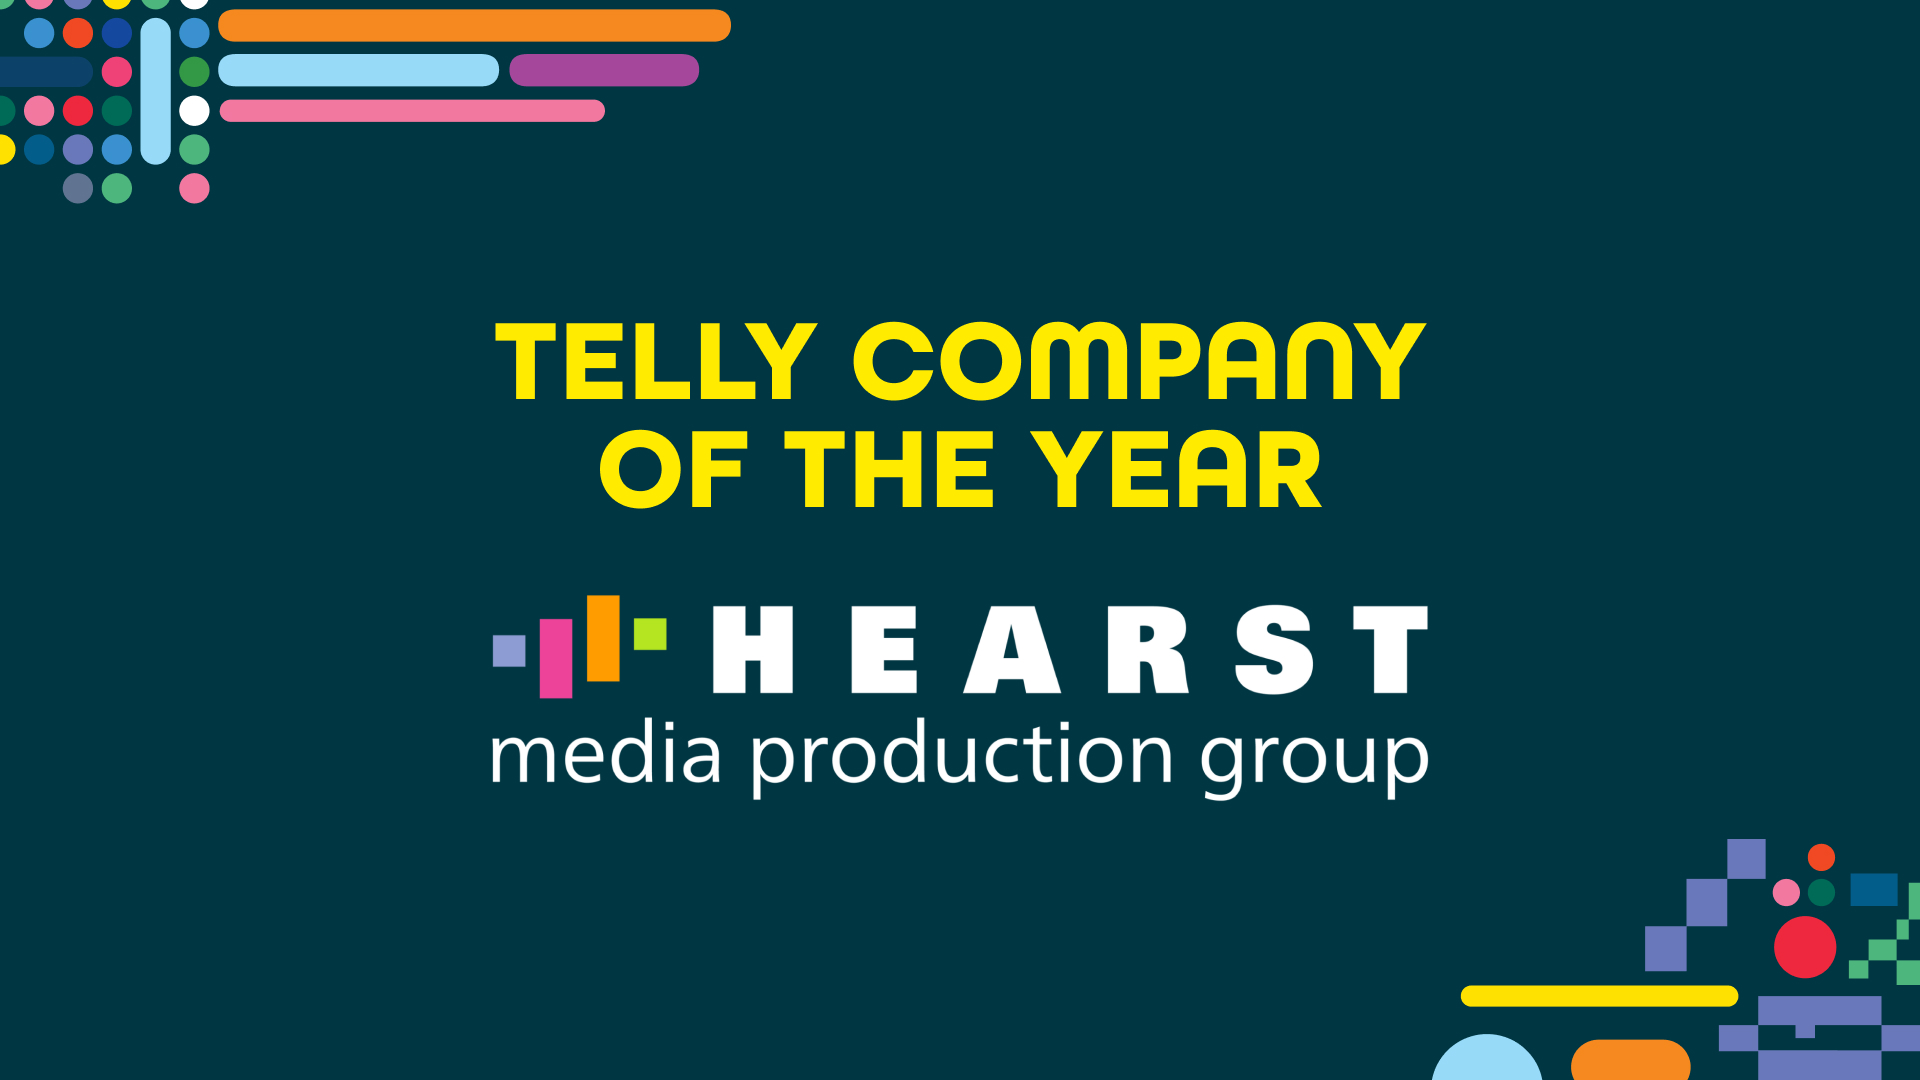 Hearst is Telly Company of Year 2023